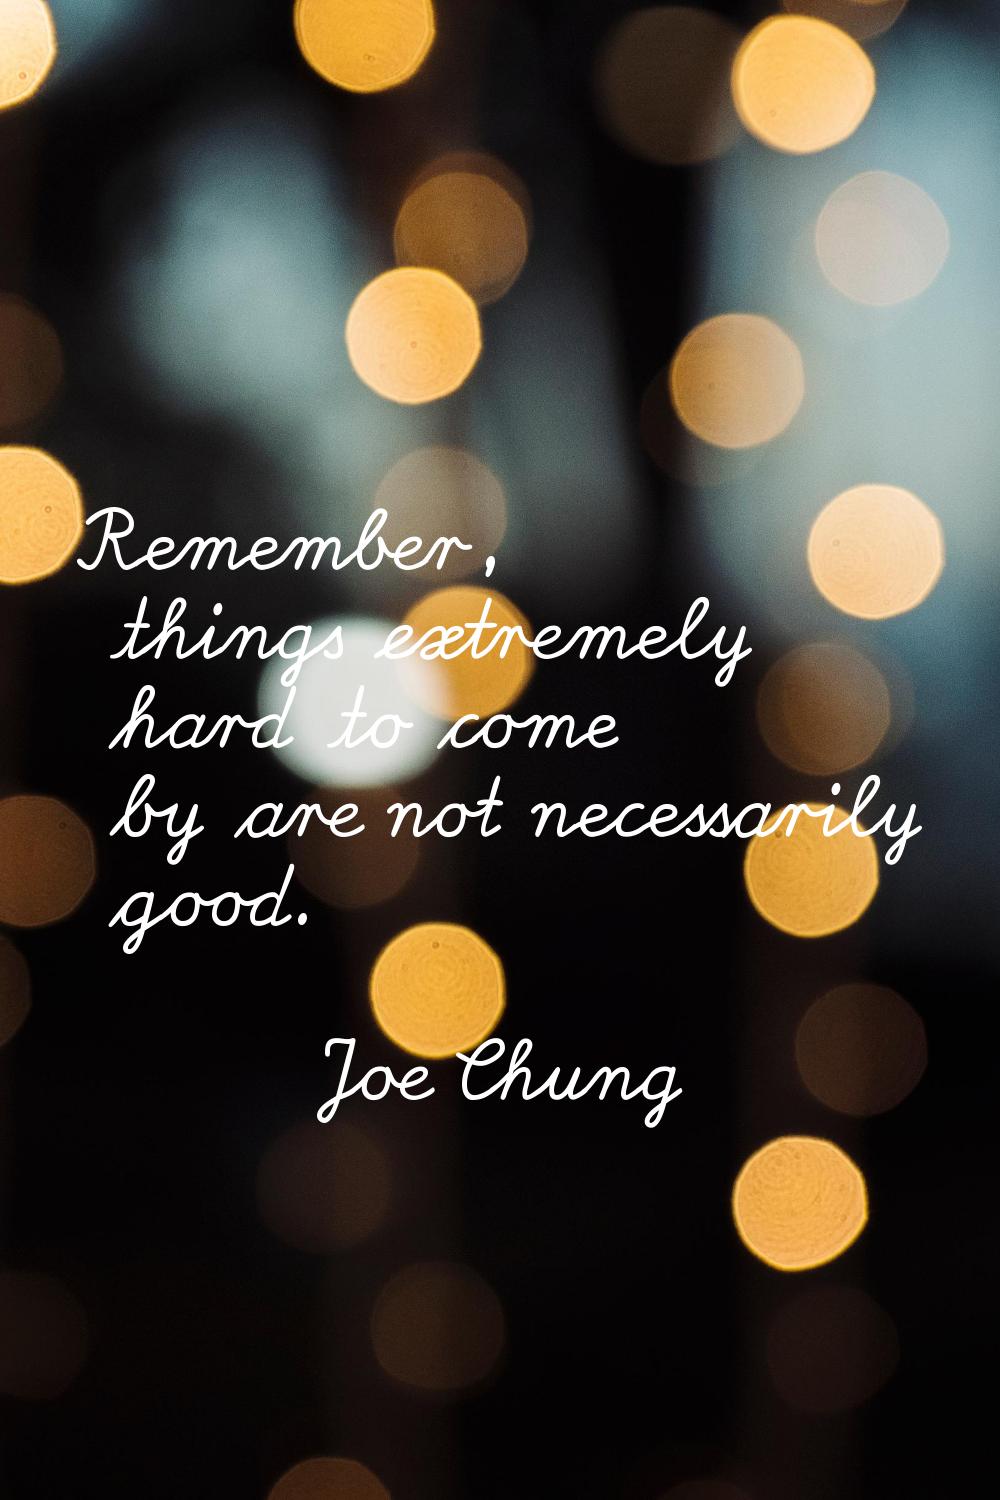 Remember, things extremely hard to come by are not necessarily good.